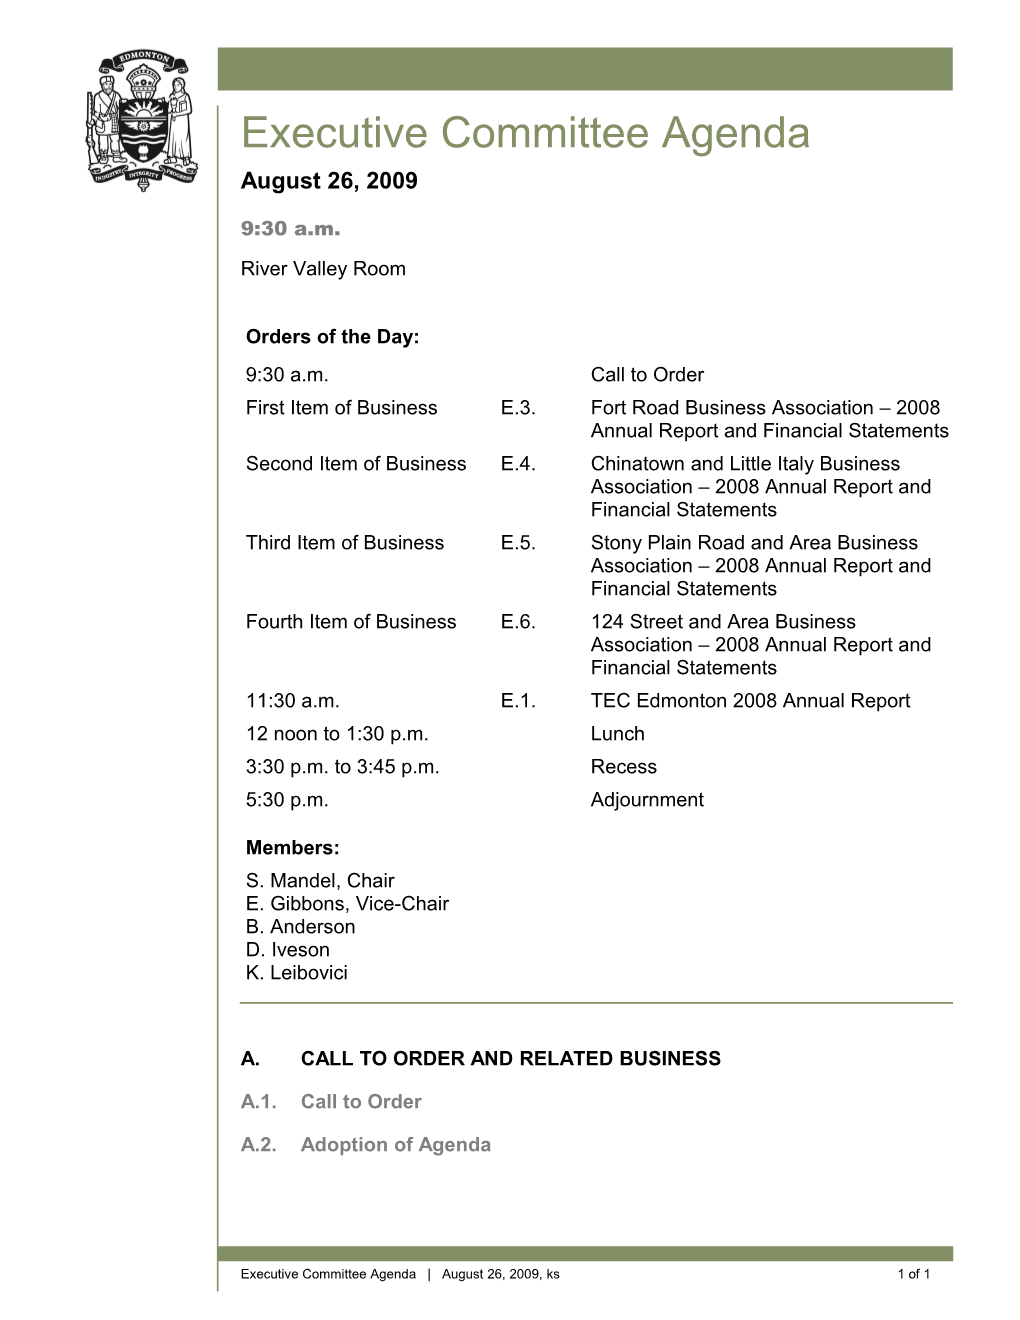 Agenda for Executive Committee August 26, 2009 Meeting